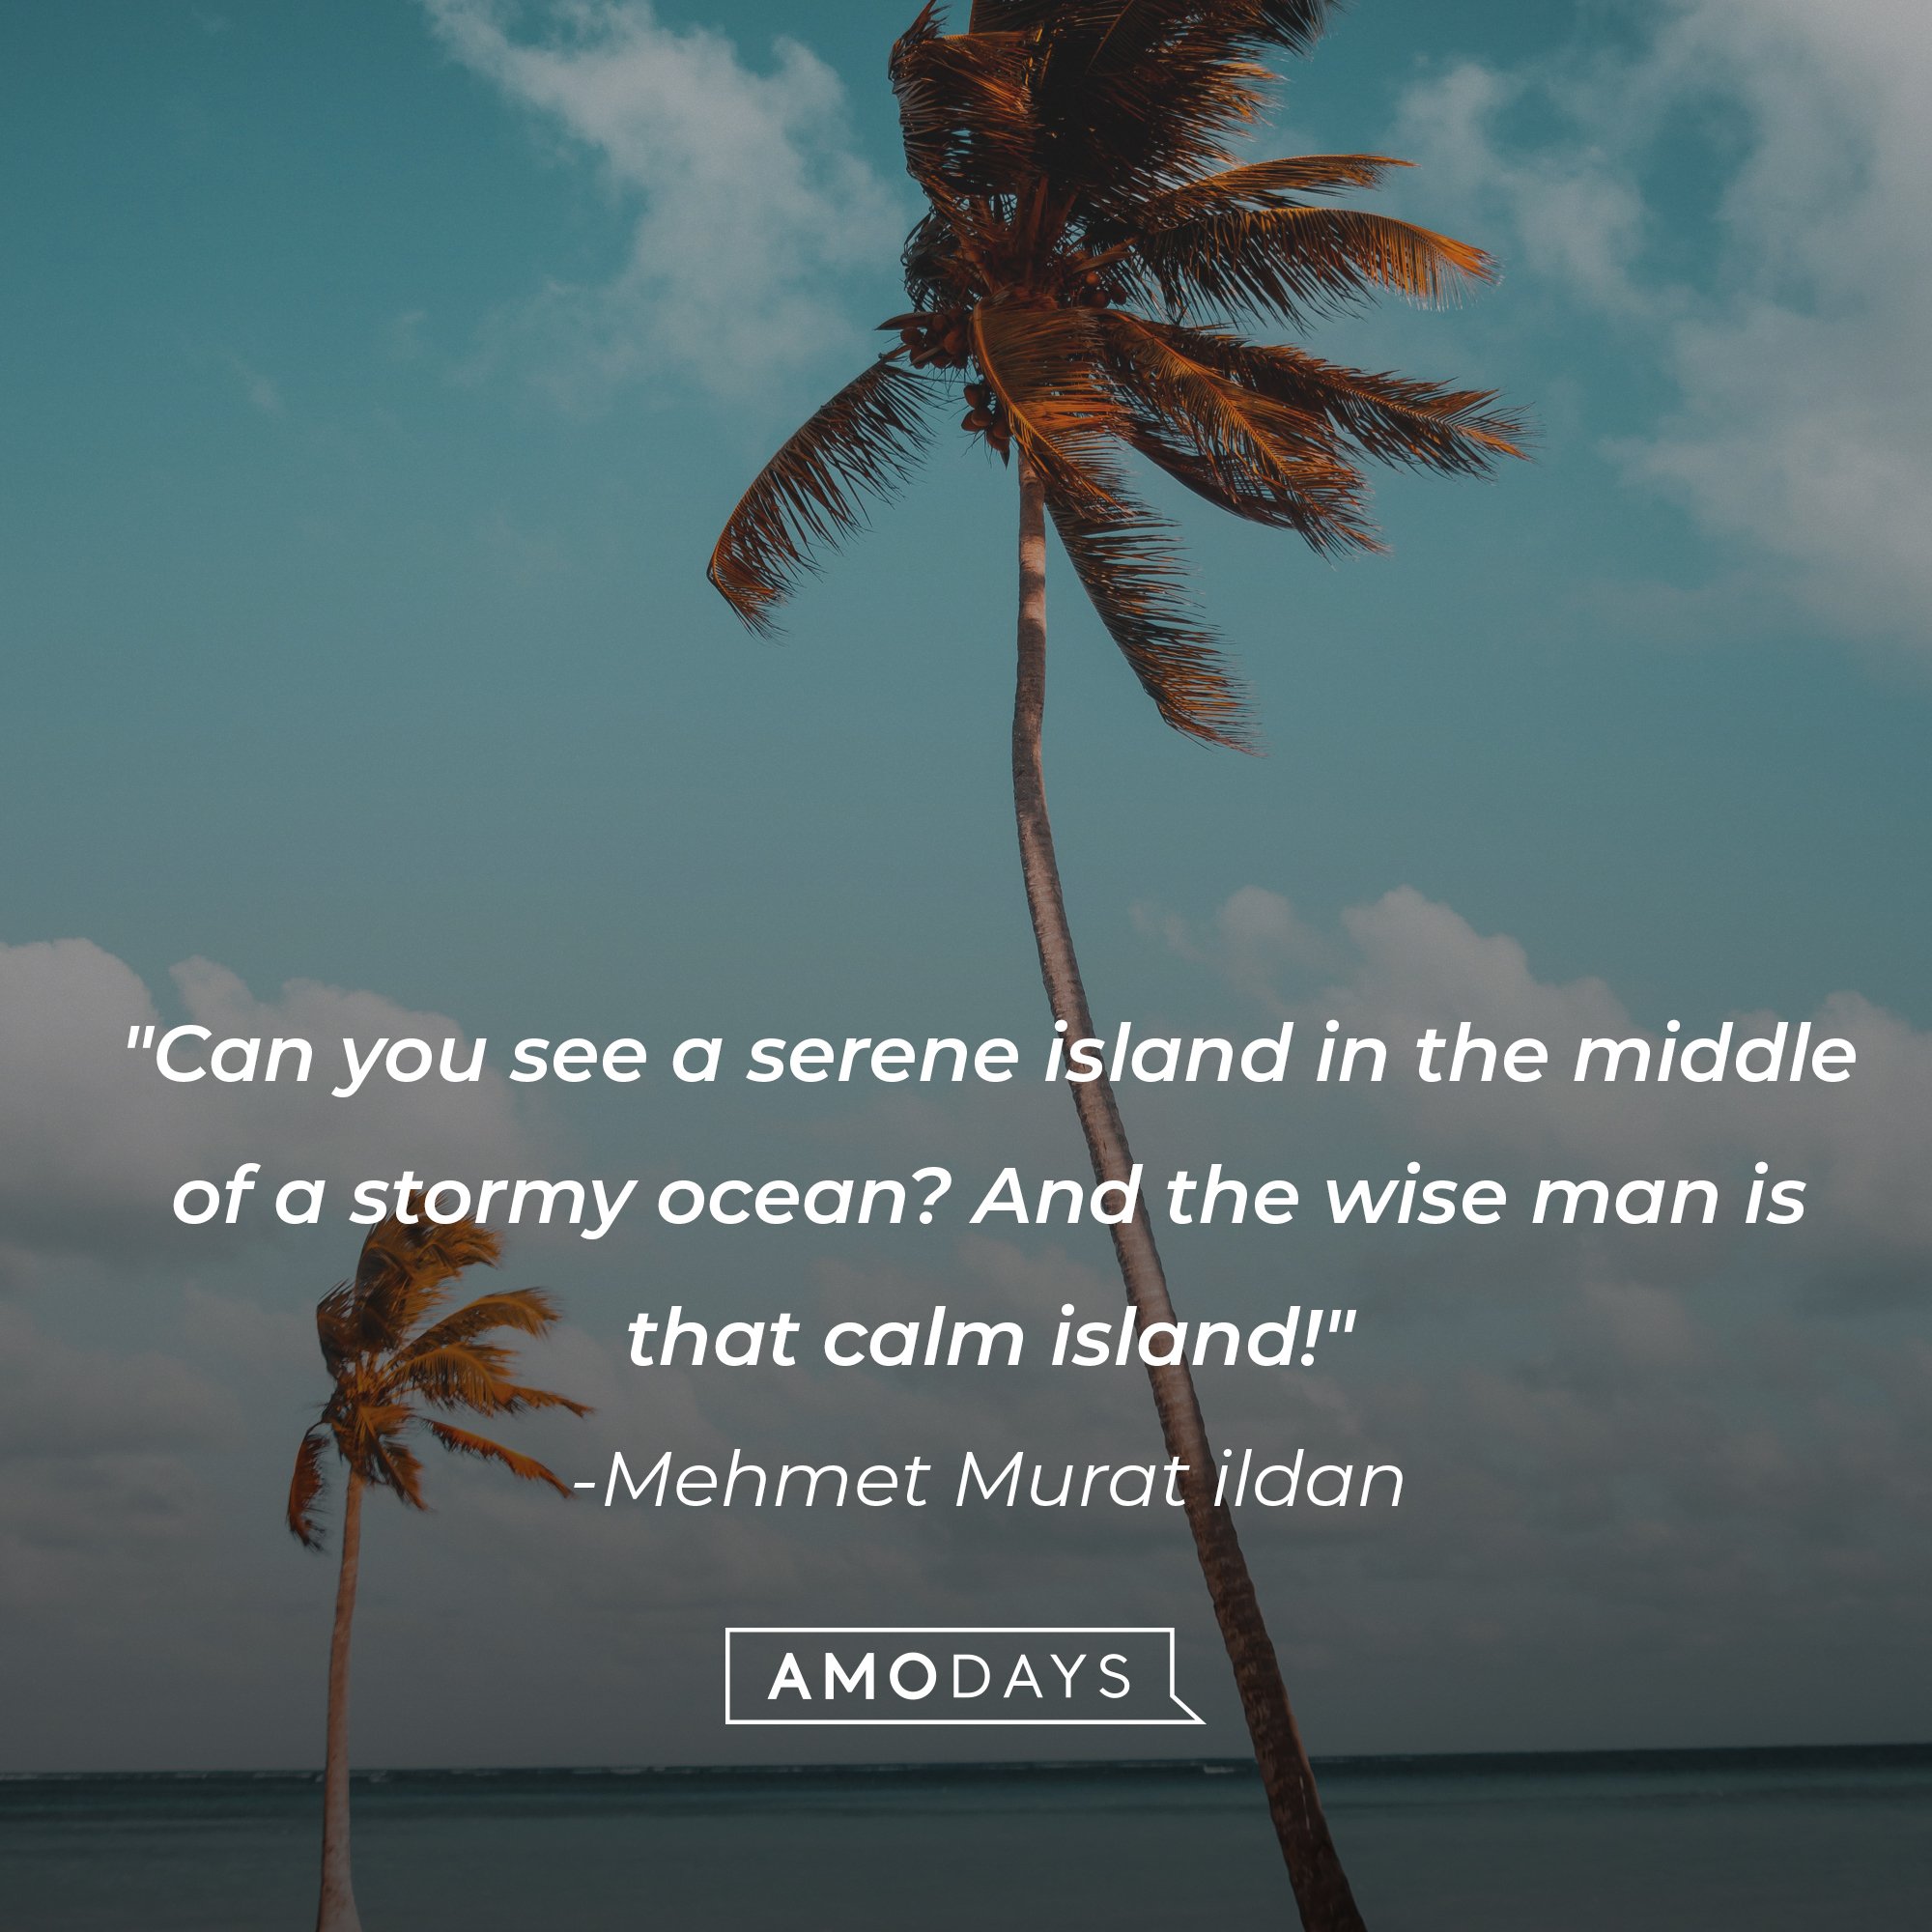 Mehmet Murat ildan's quote: "Can you see a serene island in the middle of a stormy ocean? And the wise man is that calm island!" | Image: AmoDays